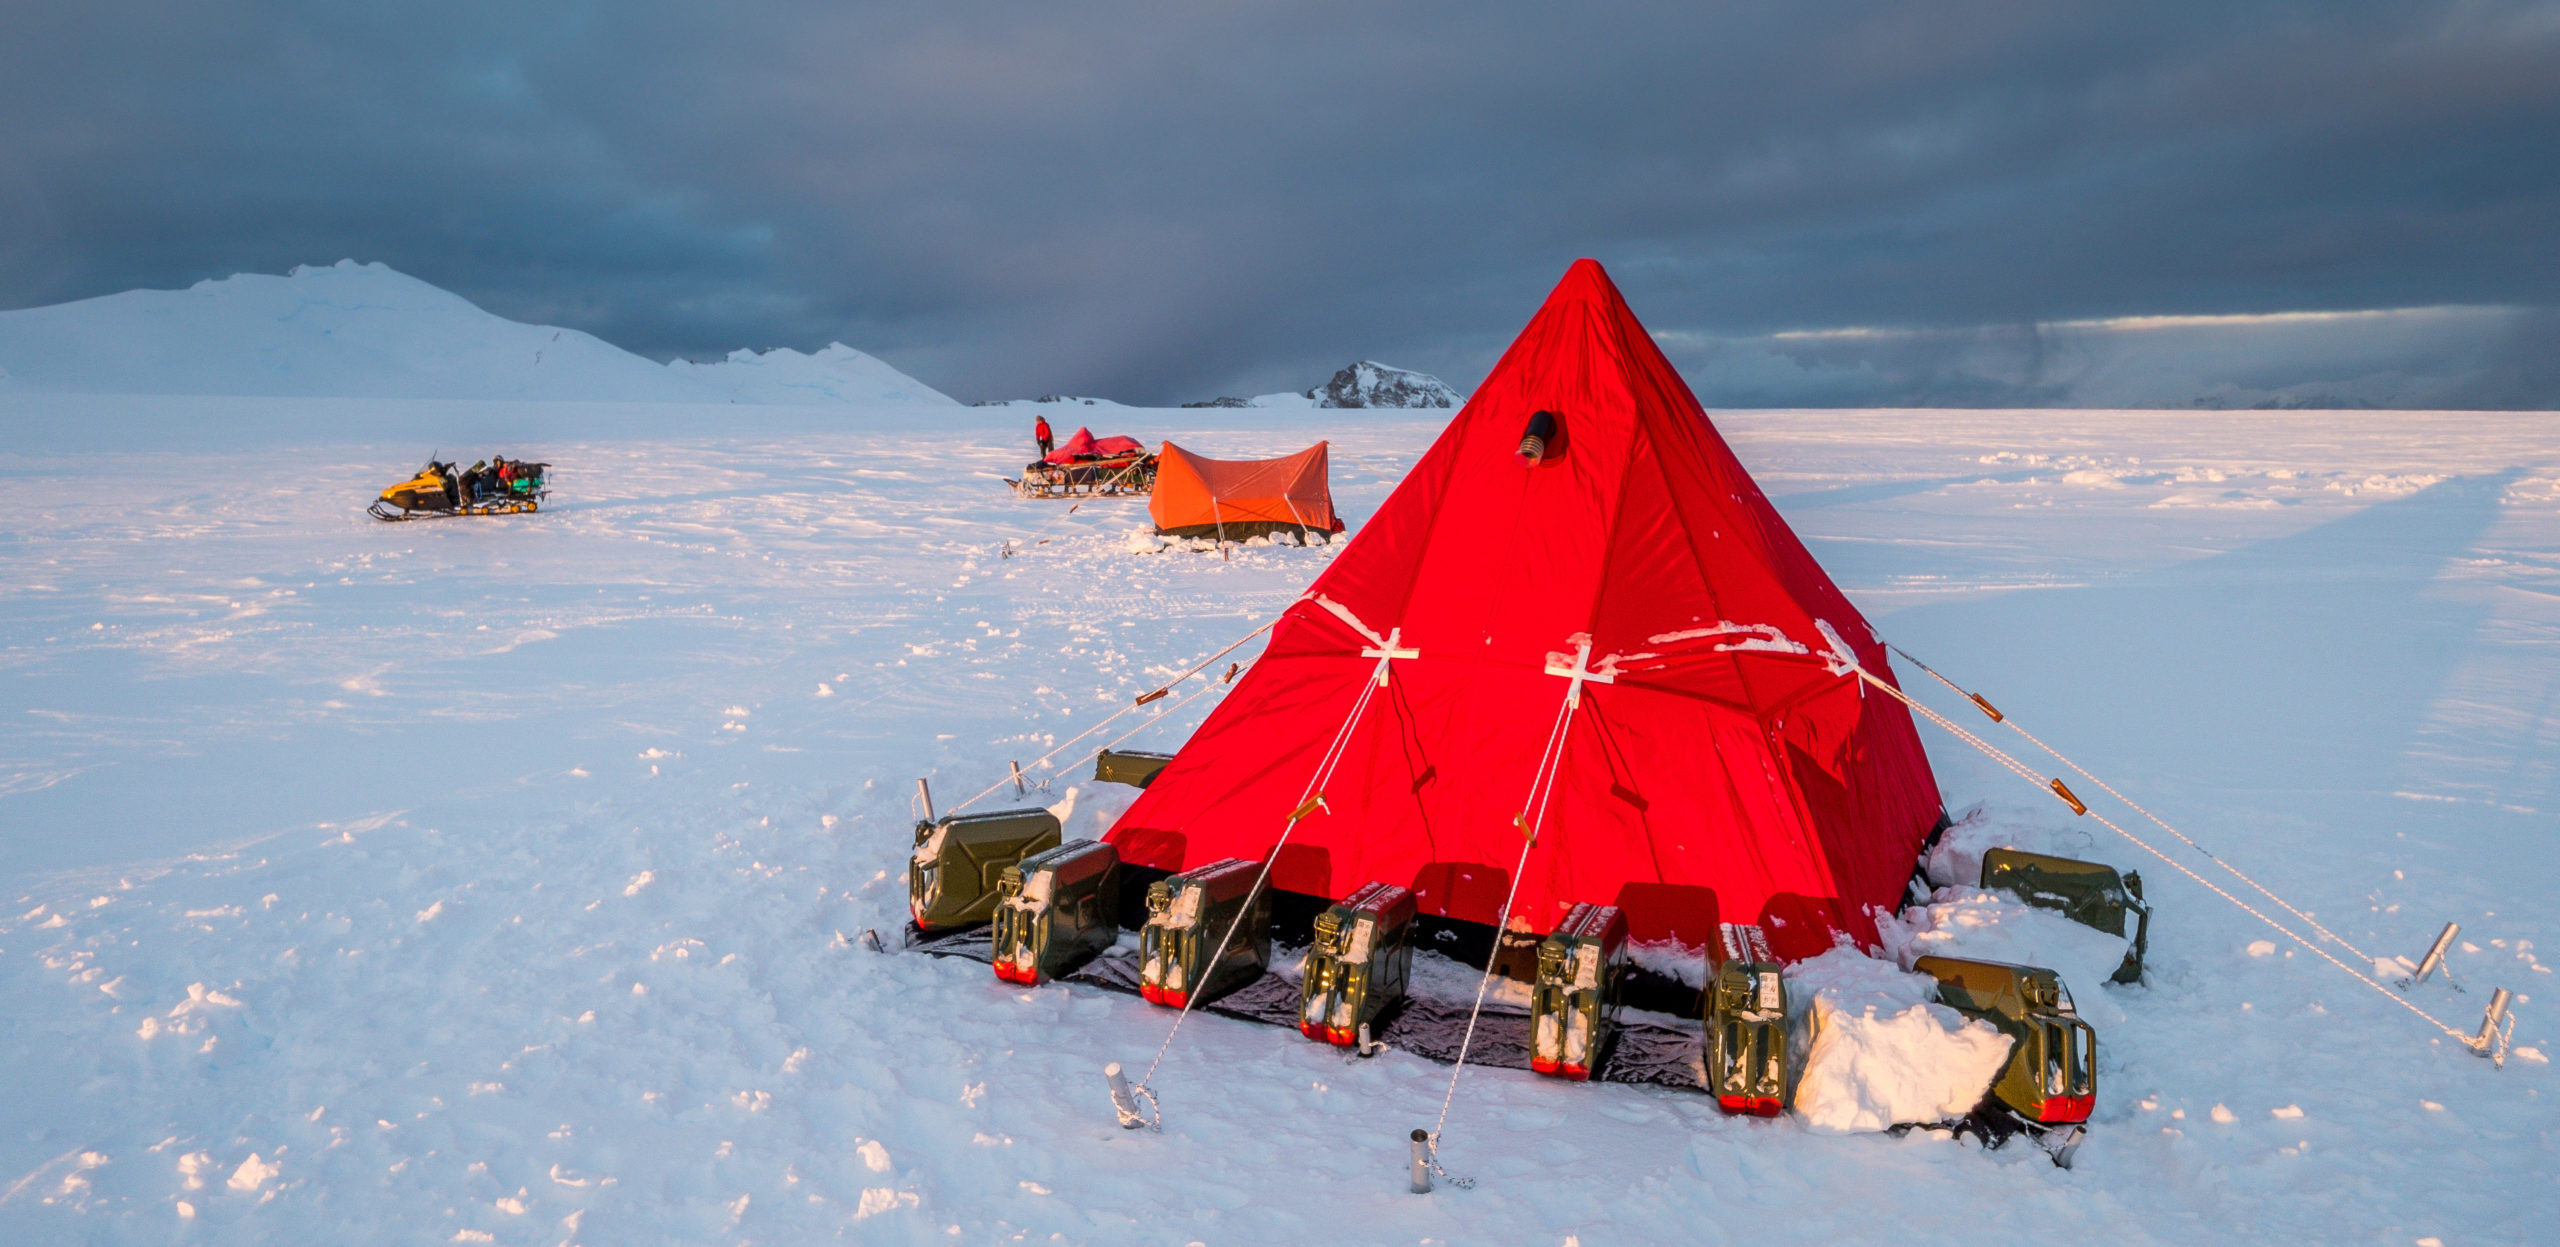 A red tent in a snowy landscape